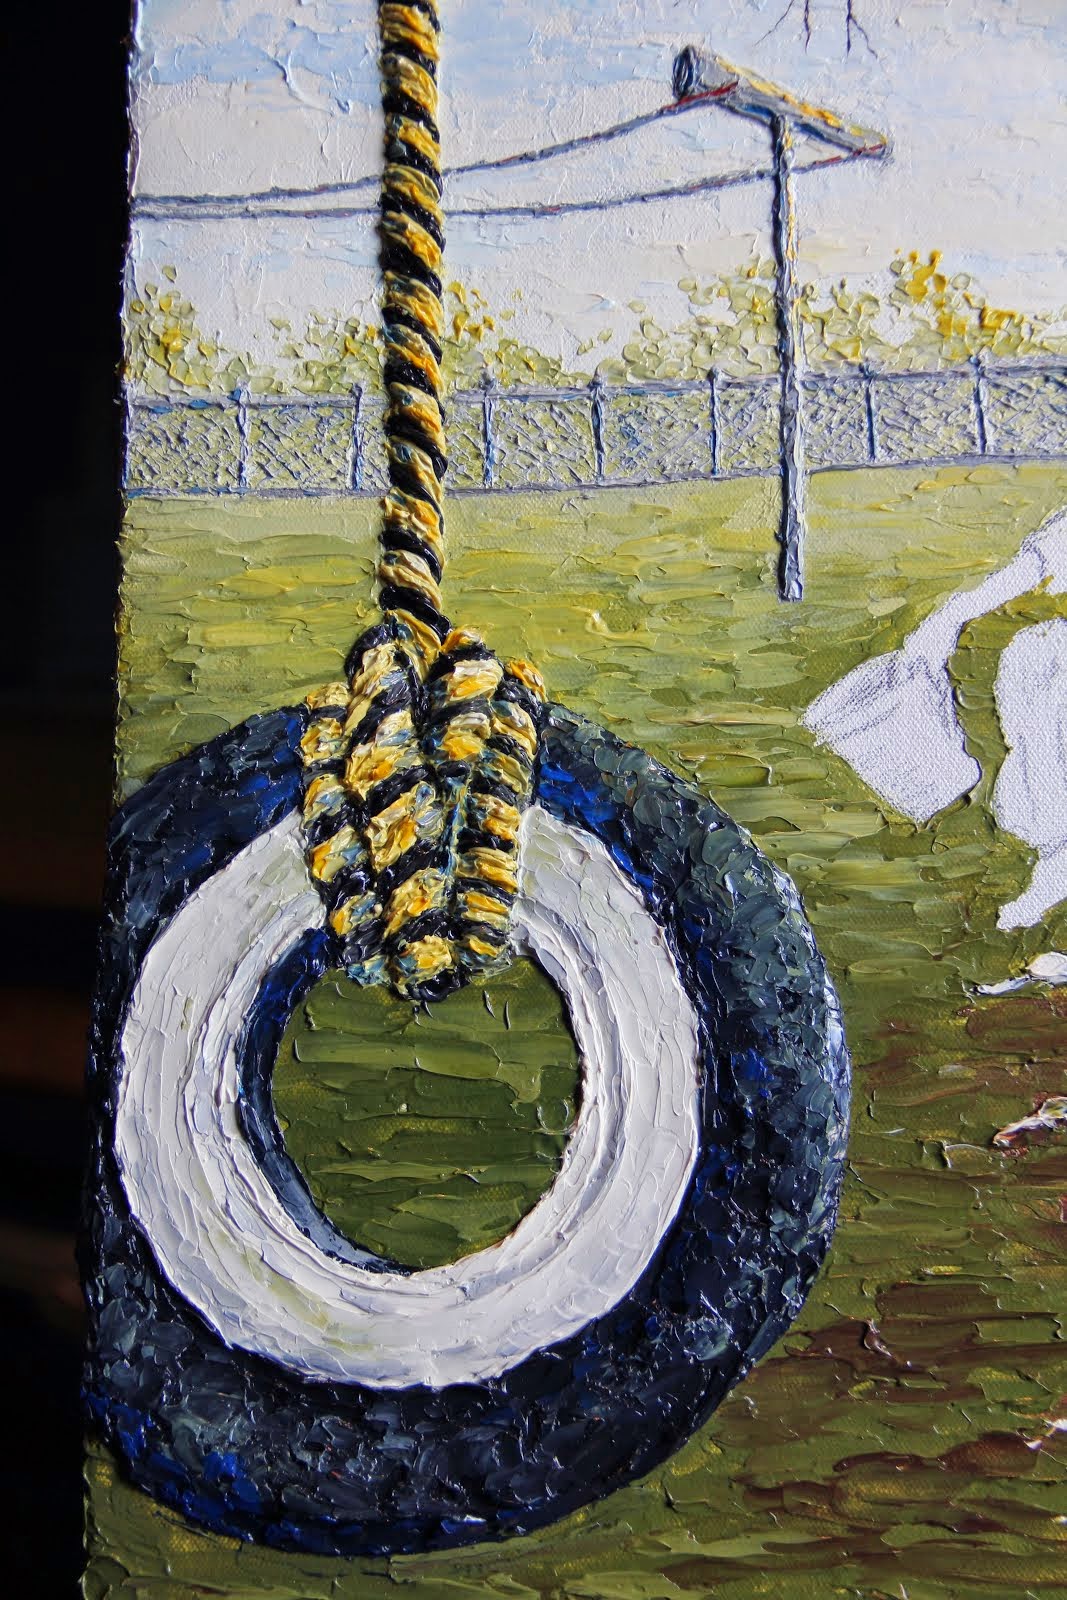 VIDEO-Painting a rope with a palette knife